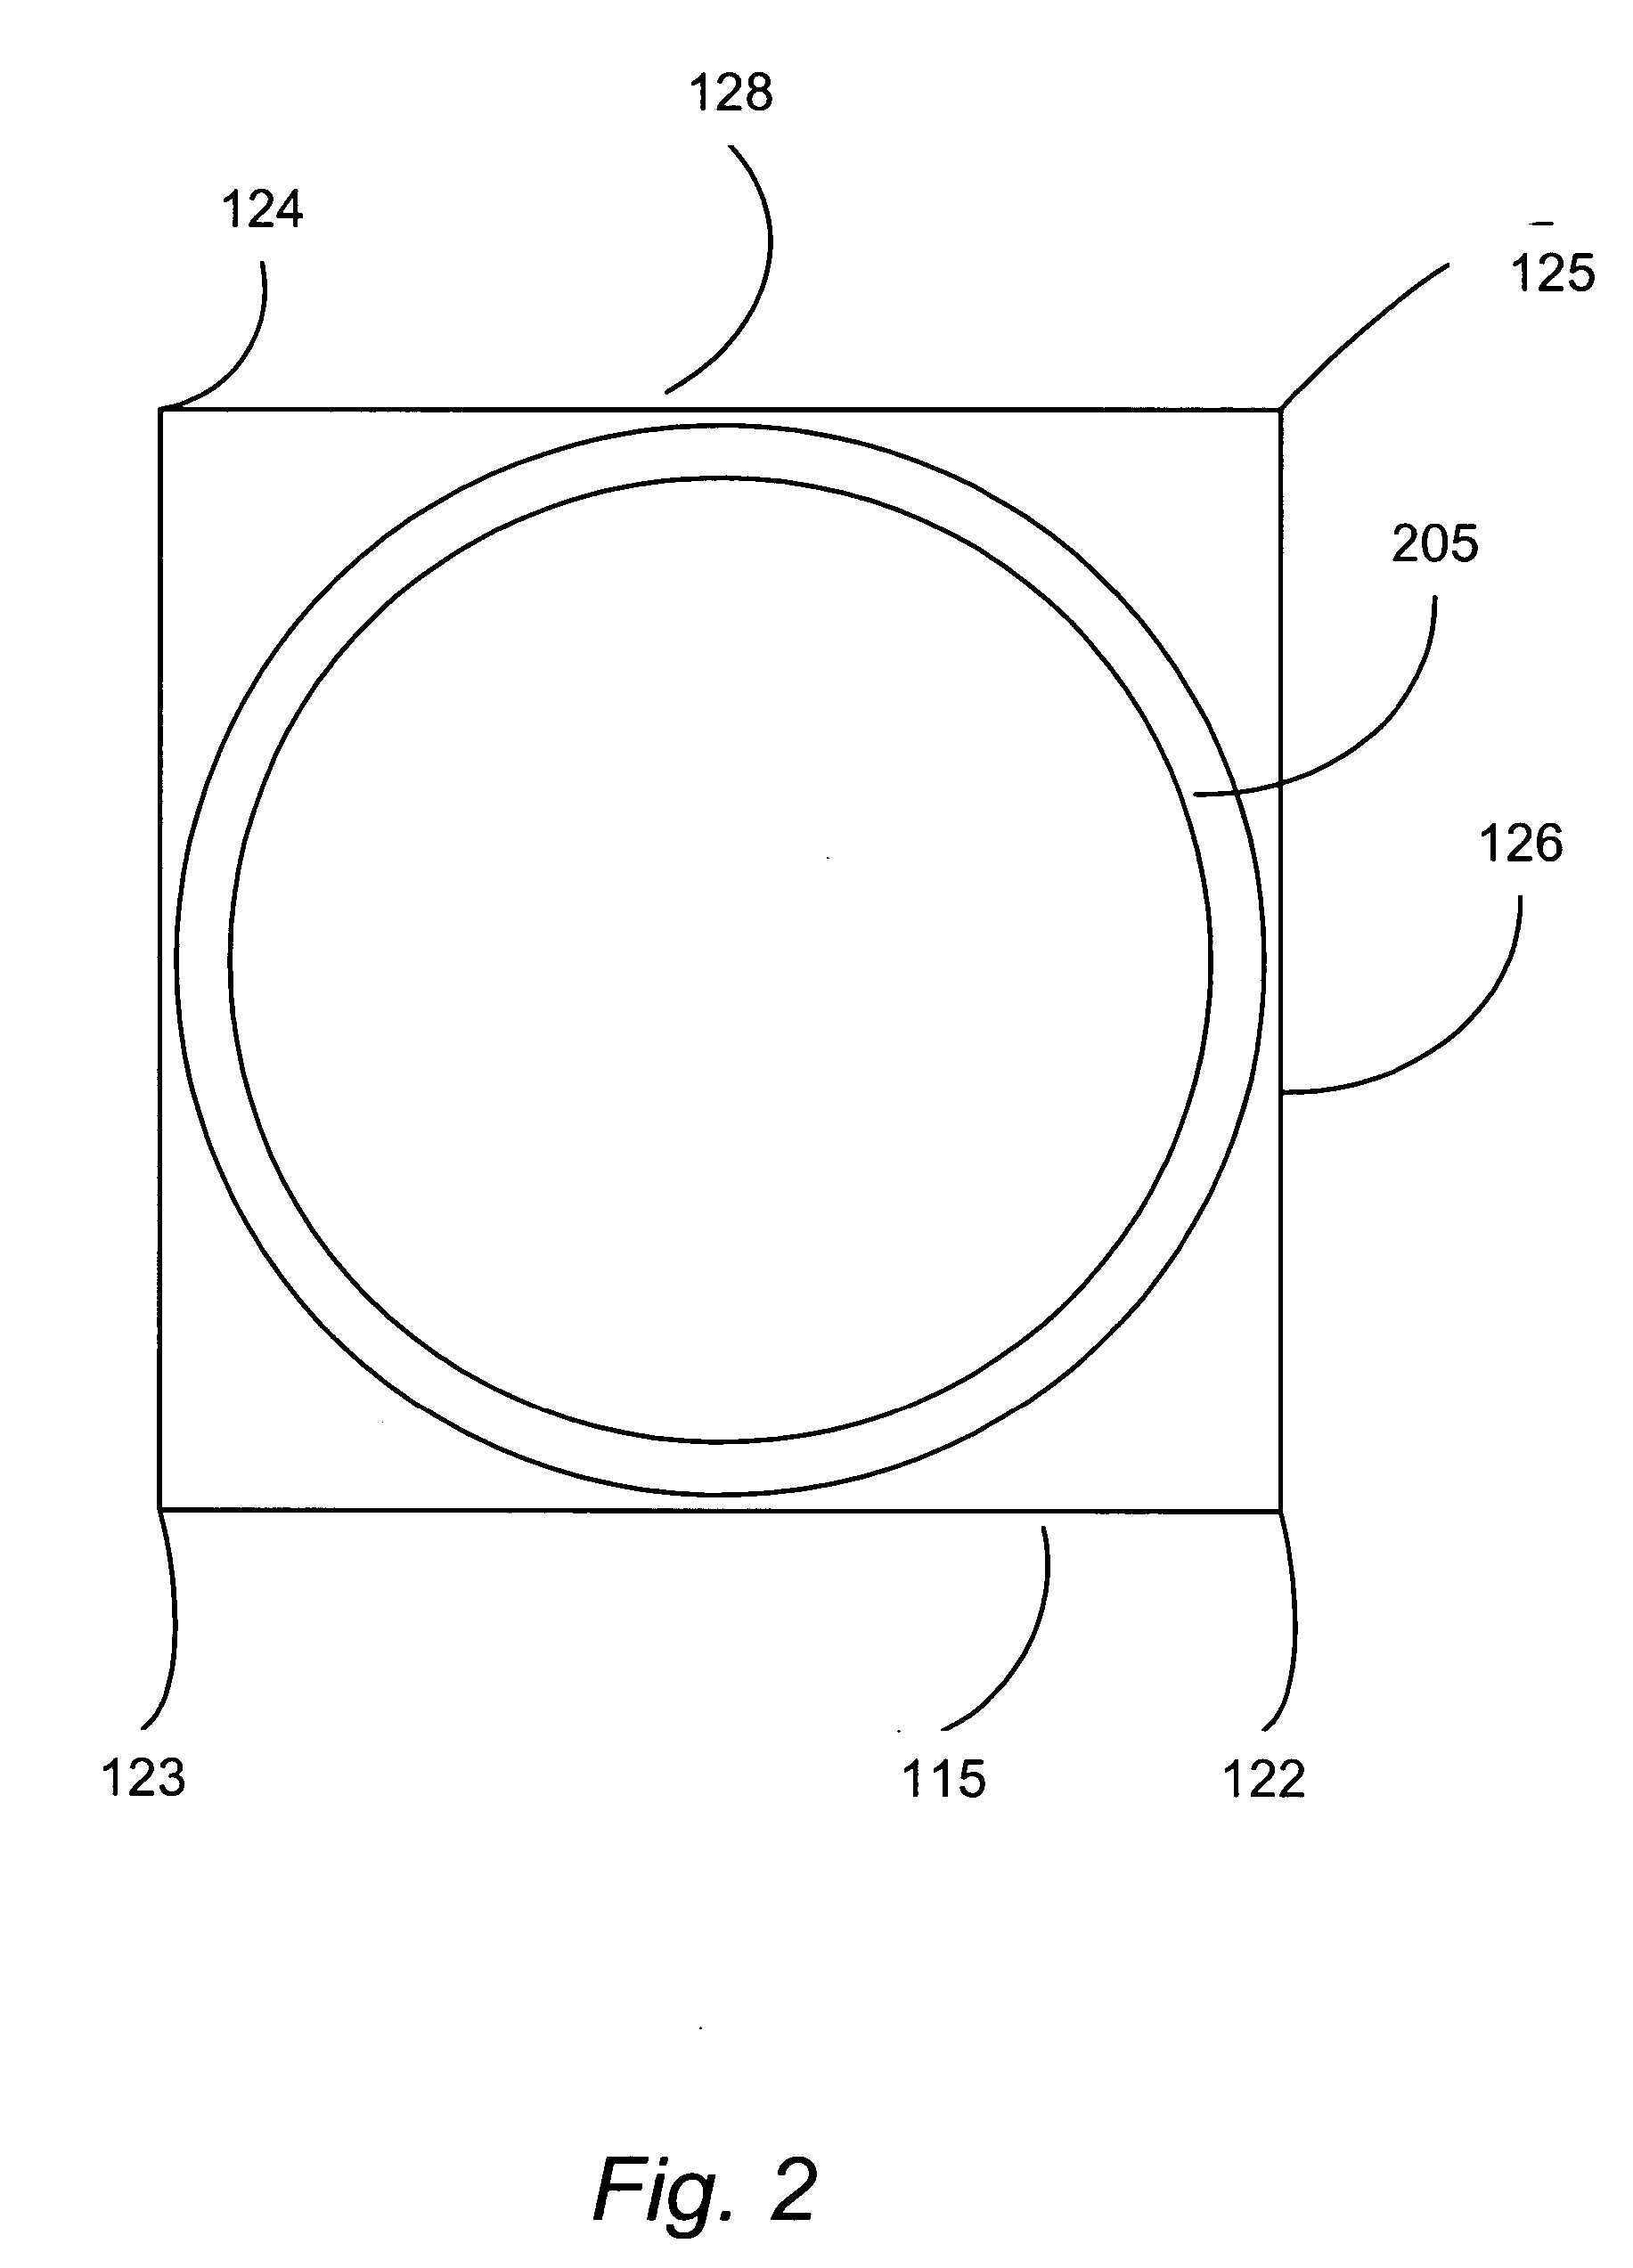 System for providing visual information on beverage sleeves